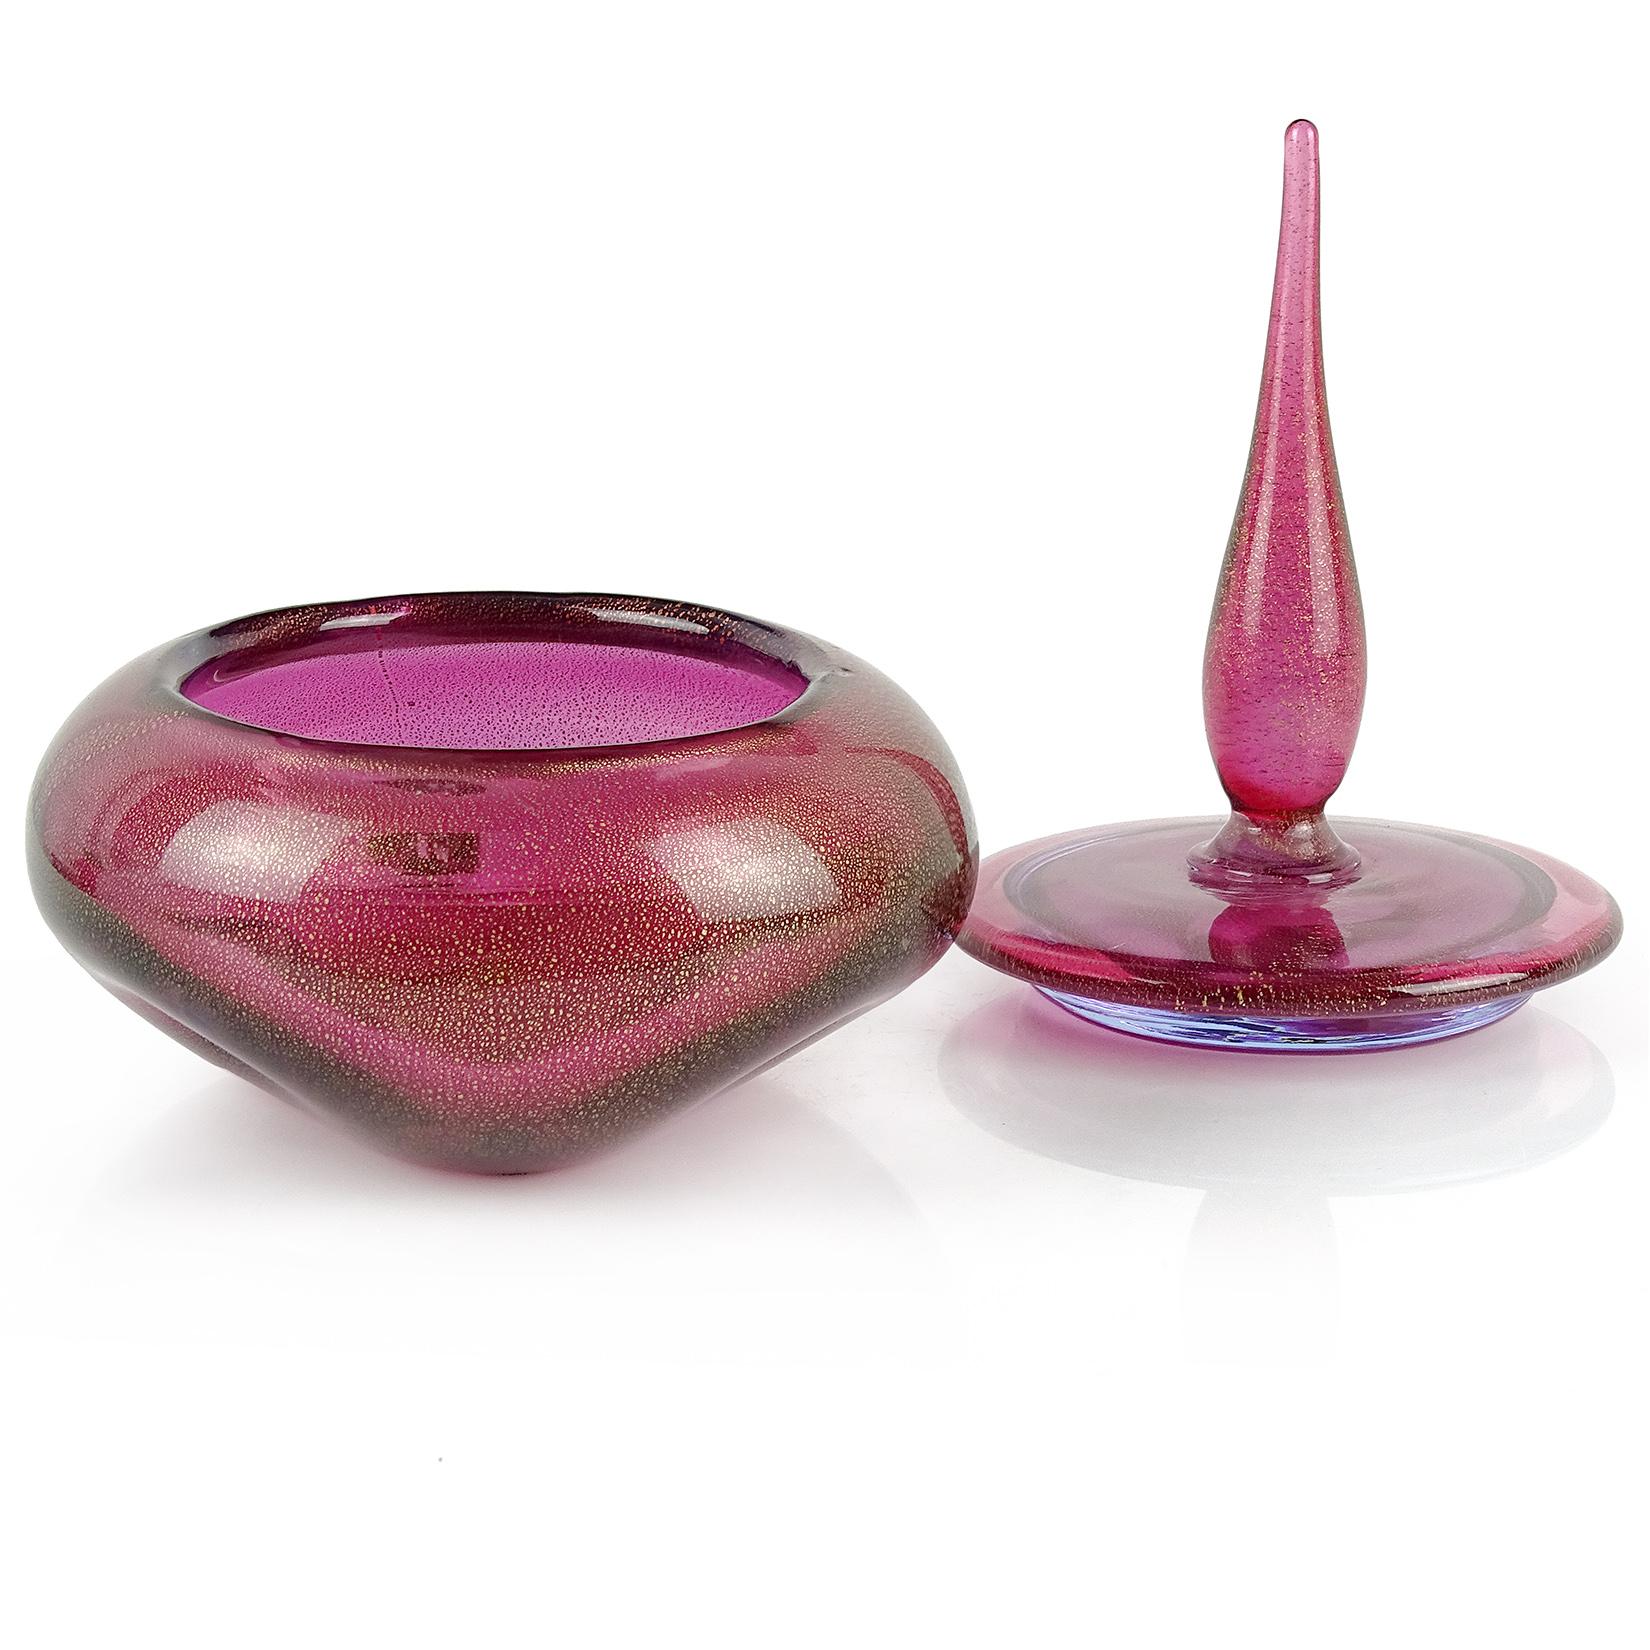 Beautiful Murano handblown amethyst and gold flecks Italian art glass powder / jewelry box. Documented to designer Alfredo Barbini, circa 1950s. The piece has three dimples on the body, with a spike top decoration. Also has a hint of blue, specially